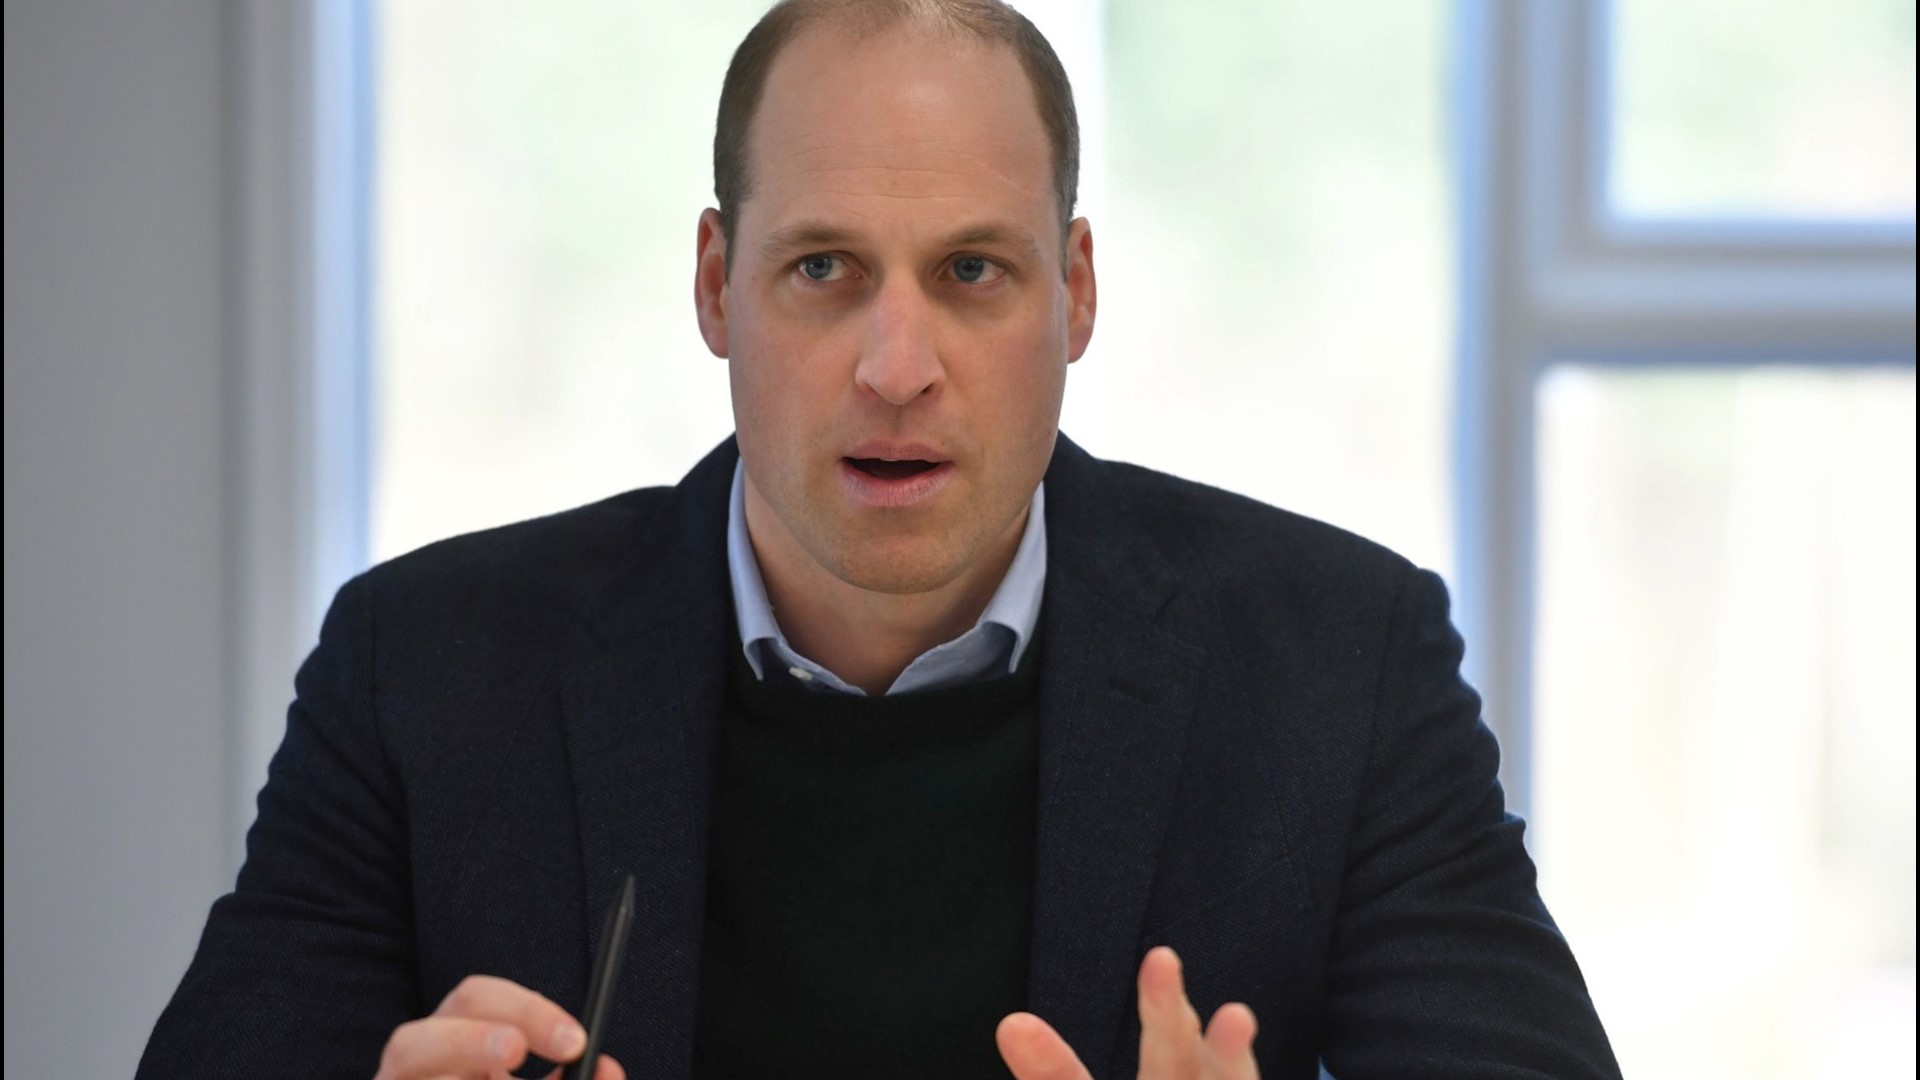 The Duke of Cambridge has criticised space race masterminds saying the world's greatest minds need to focus on solving environmental problems facing Earth instead. Veuer's Chloe Hurst has the story!